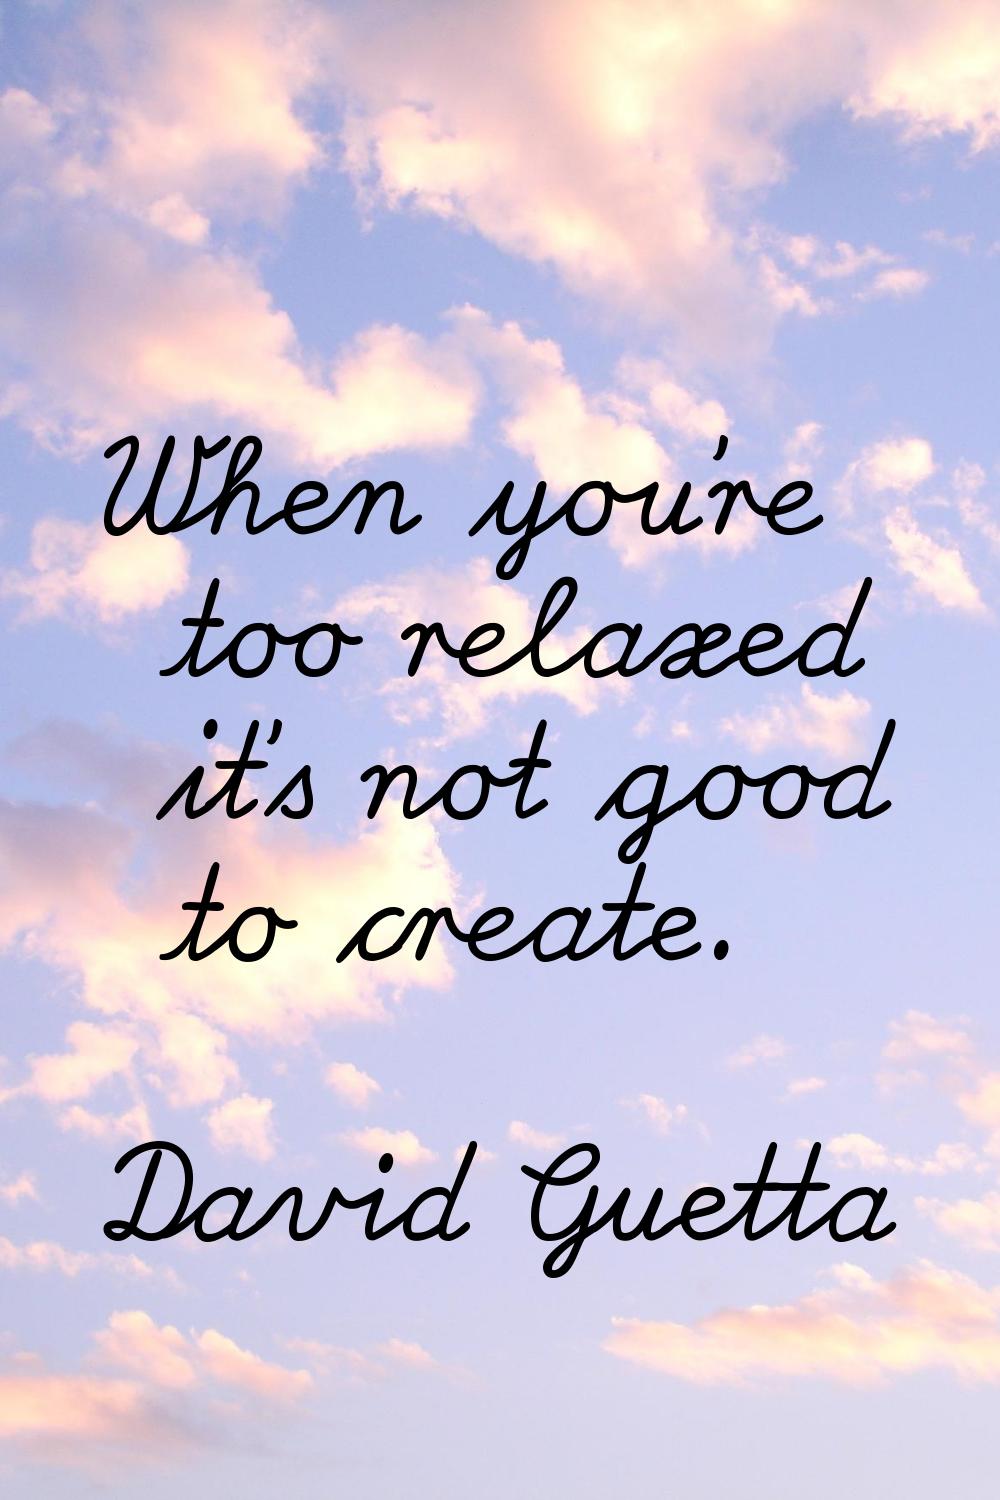 When you're too relaxed it's not good to create.